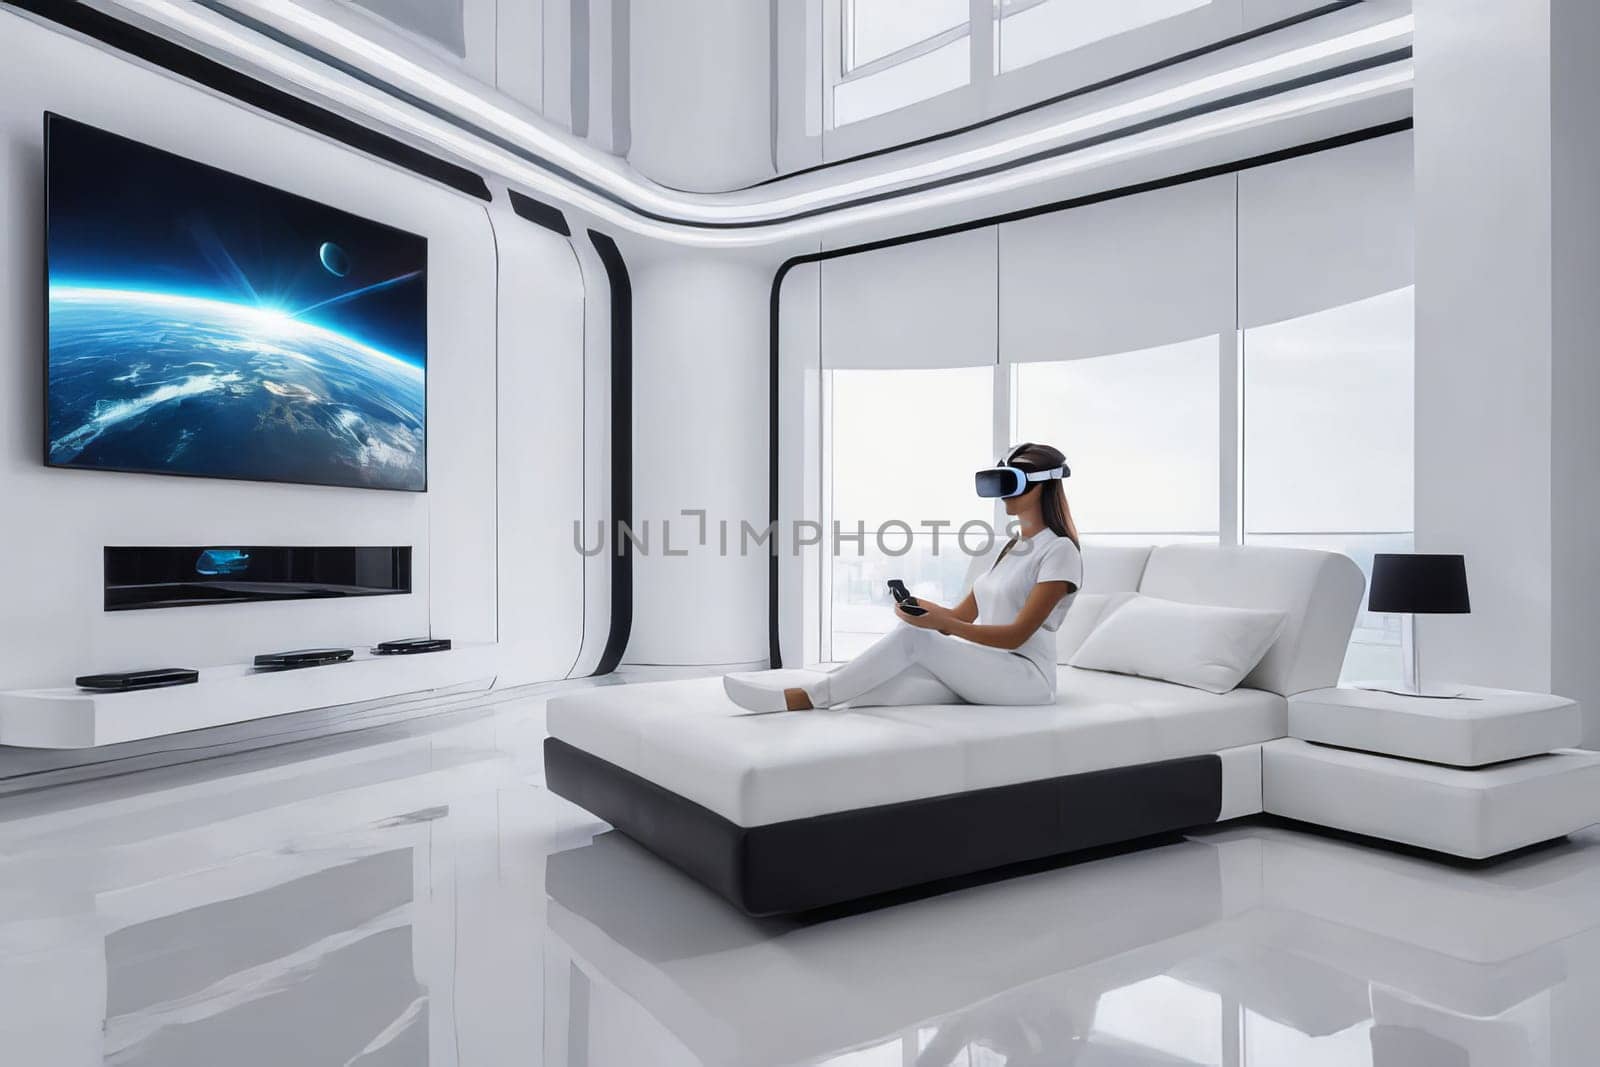 Step into a futuristic virtual reality encounter within a modern white interior, where innovation and style converge seamlessly